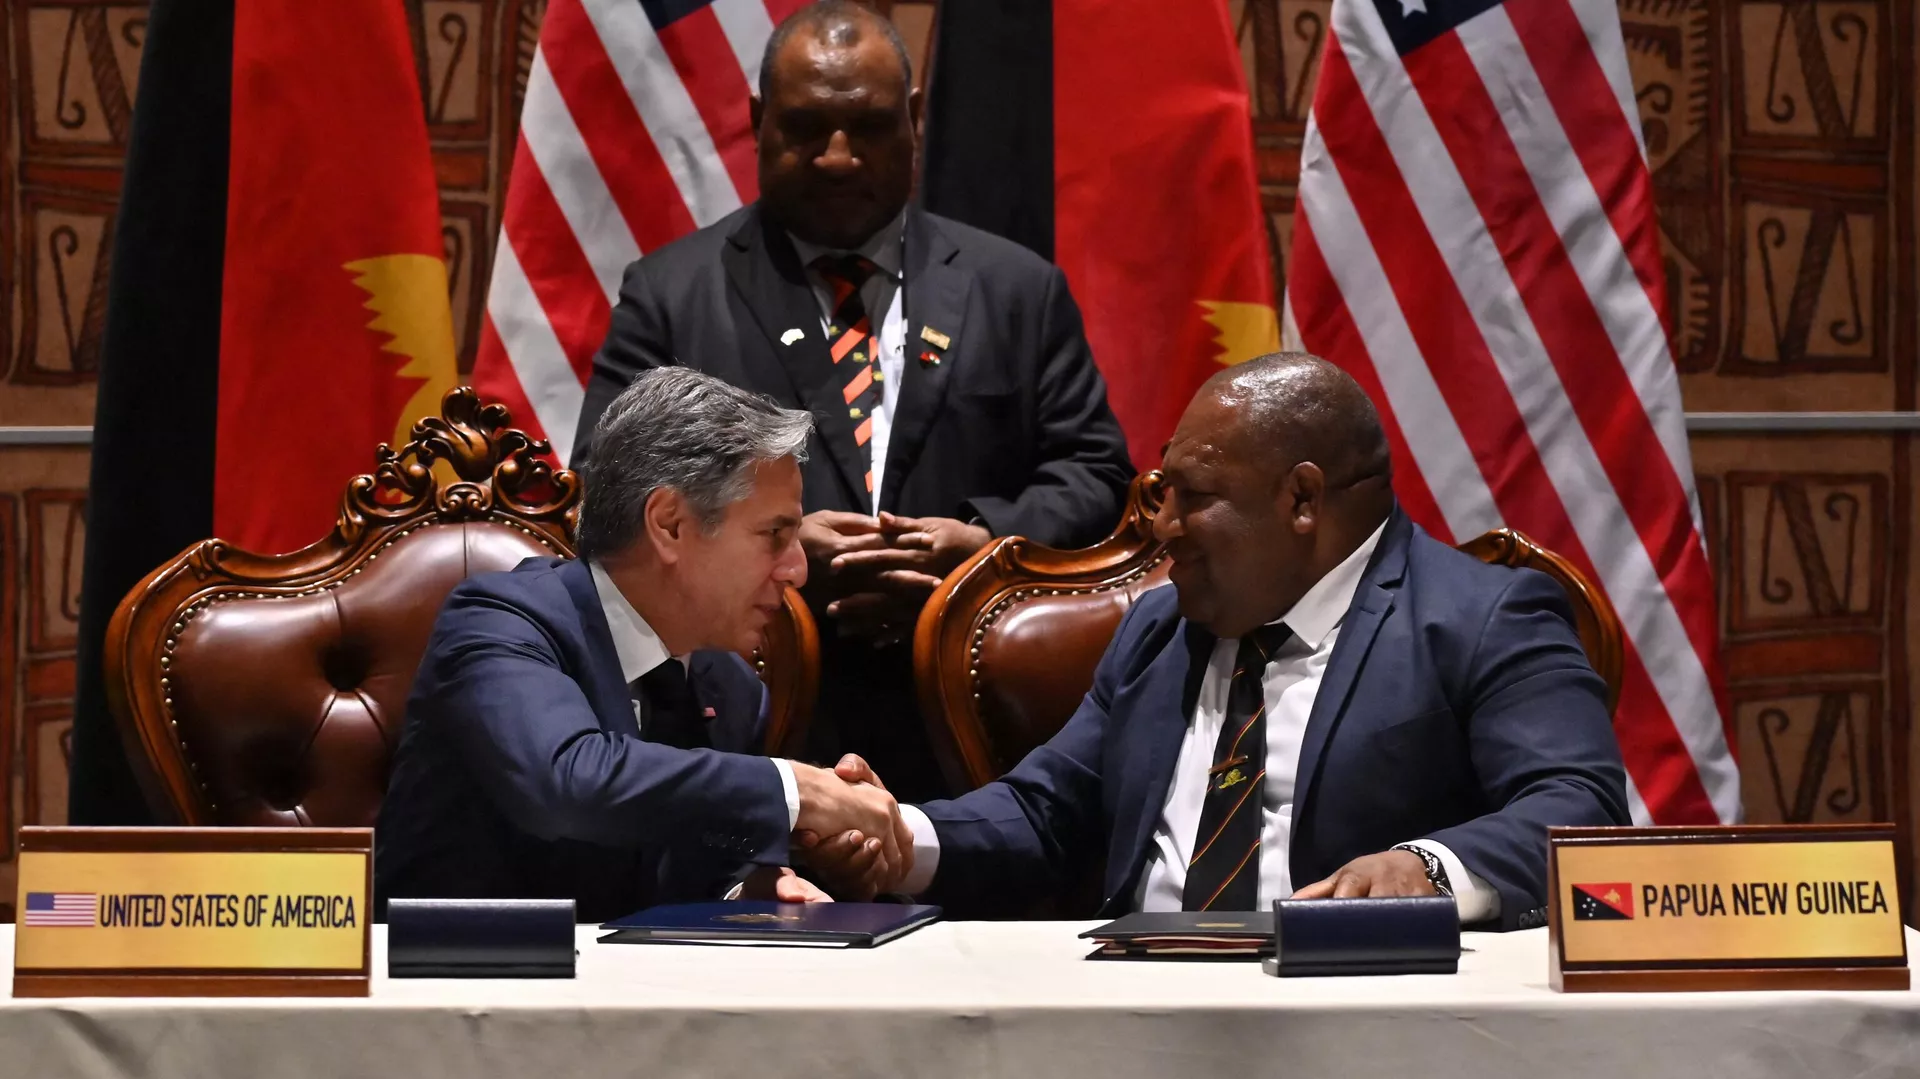 US Secretary of State Antony Blinken (L) and Papua New Guinea’s Defence Minister Win Bakri Daki (R) shake hands after signing a security agreement on on May 22, 2023. - Sputnik International, 1920, 29.05.2023